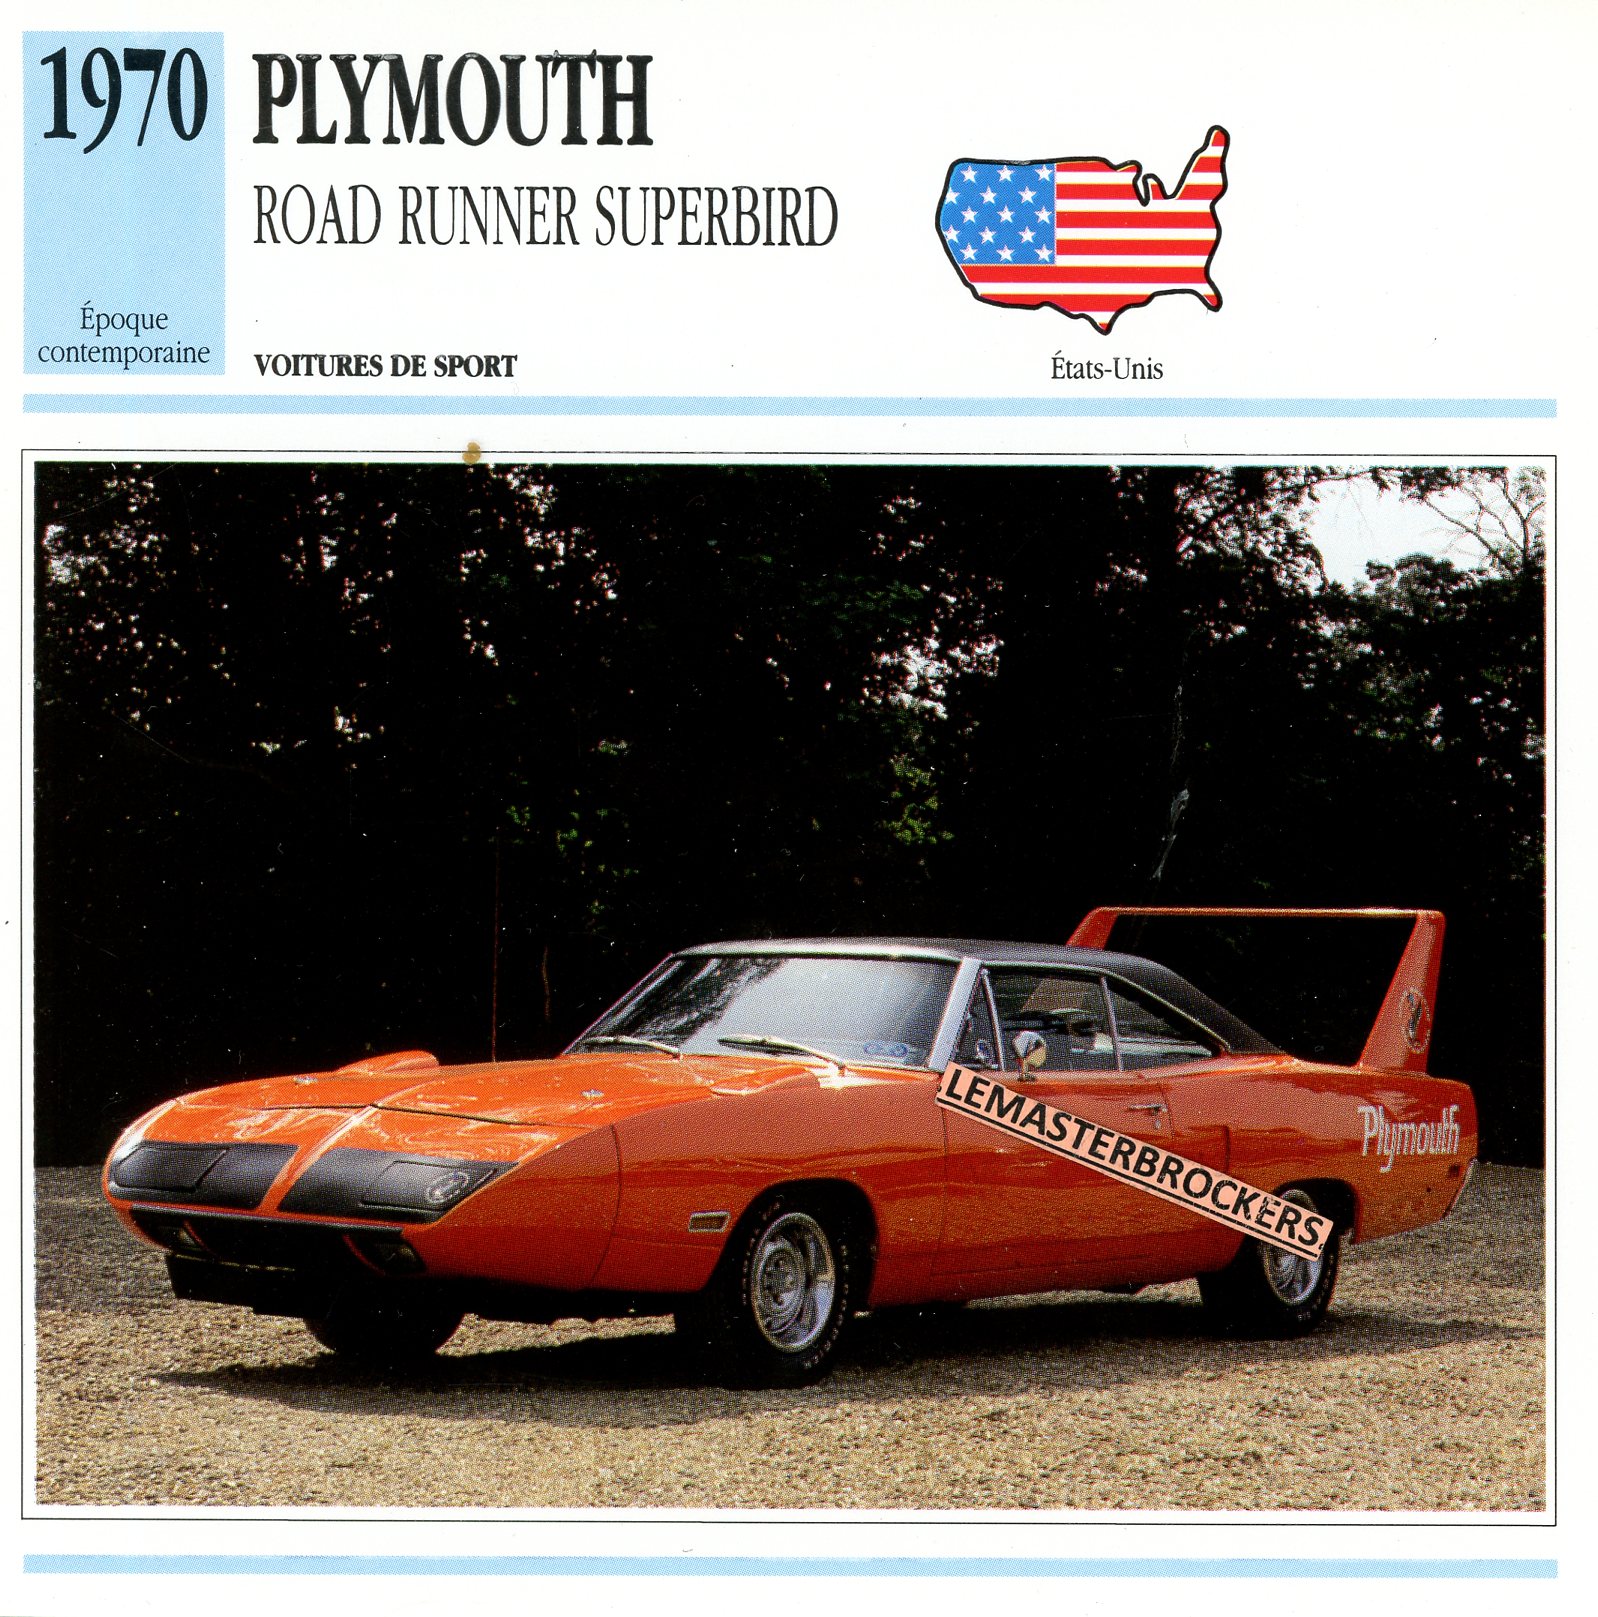 PLYMOUTH ROAD RUNNER SUPERBIRD 1970 - FICHE AUTO - CARS CARD ATLAS ÉDITION